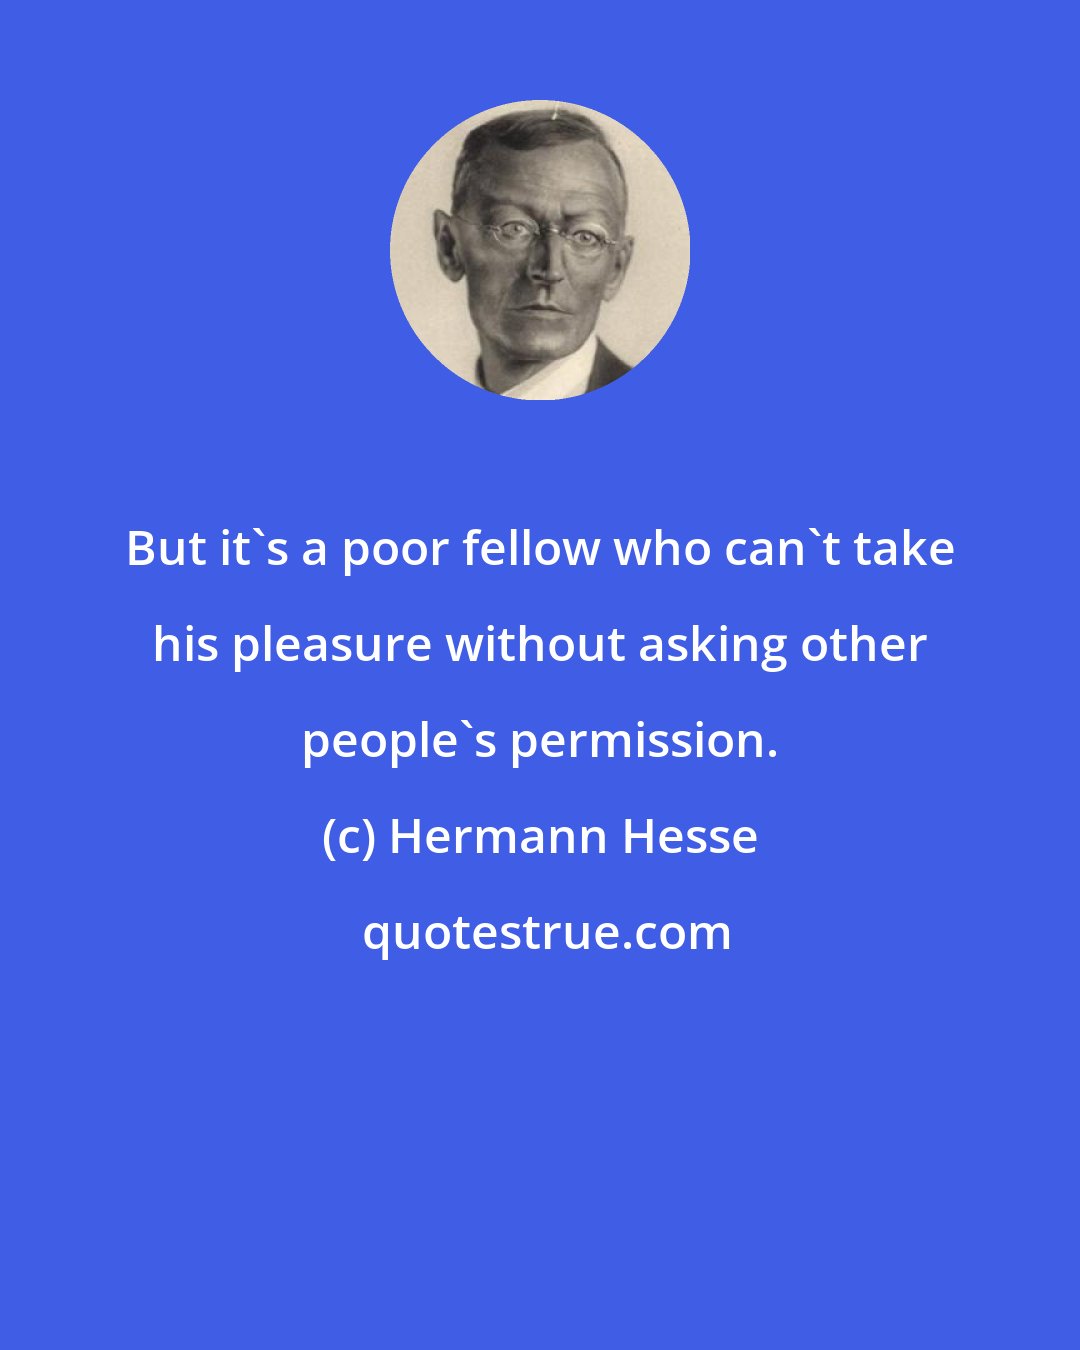 Hermann Hesse: But it's a poor fellow who can't take his pleasure without asking other people's permission.